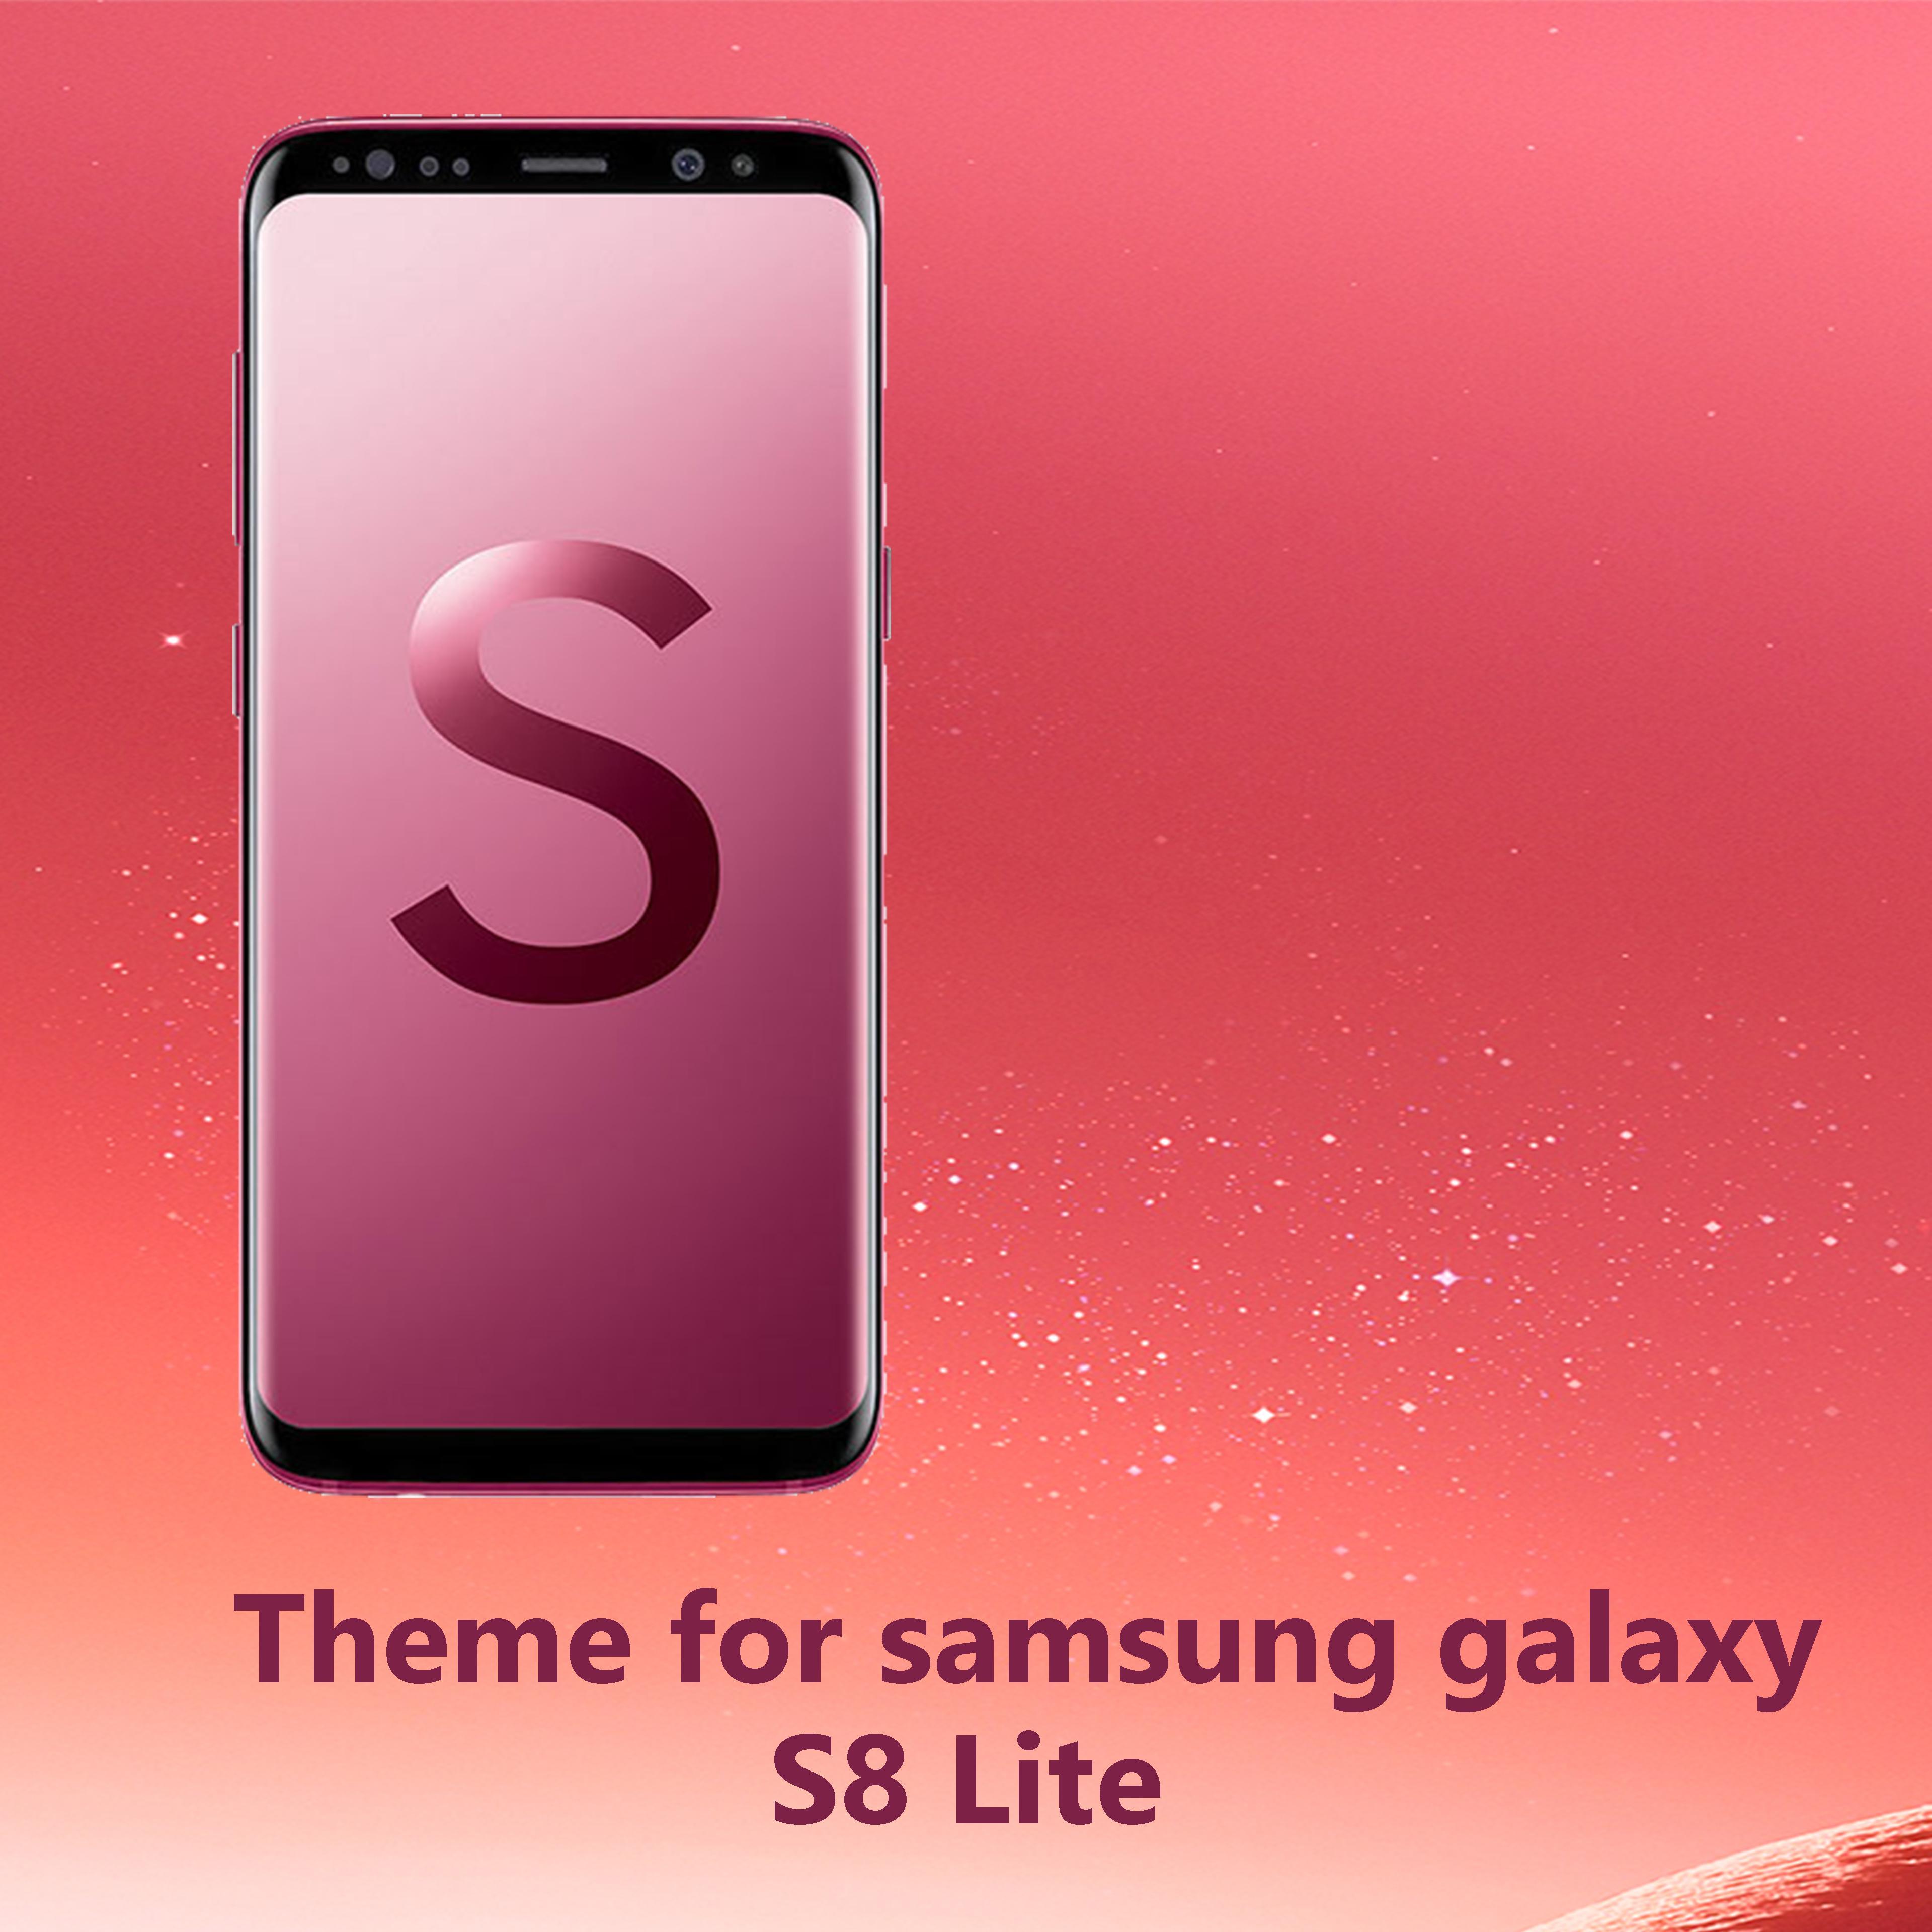 Theme for Samsung Galaxy S8 lite for Android - APK Download